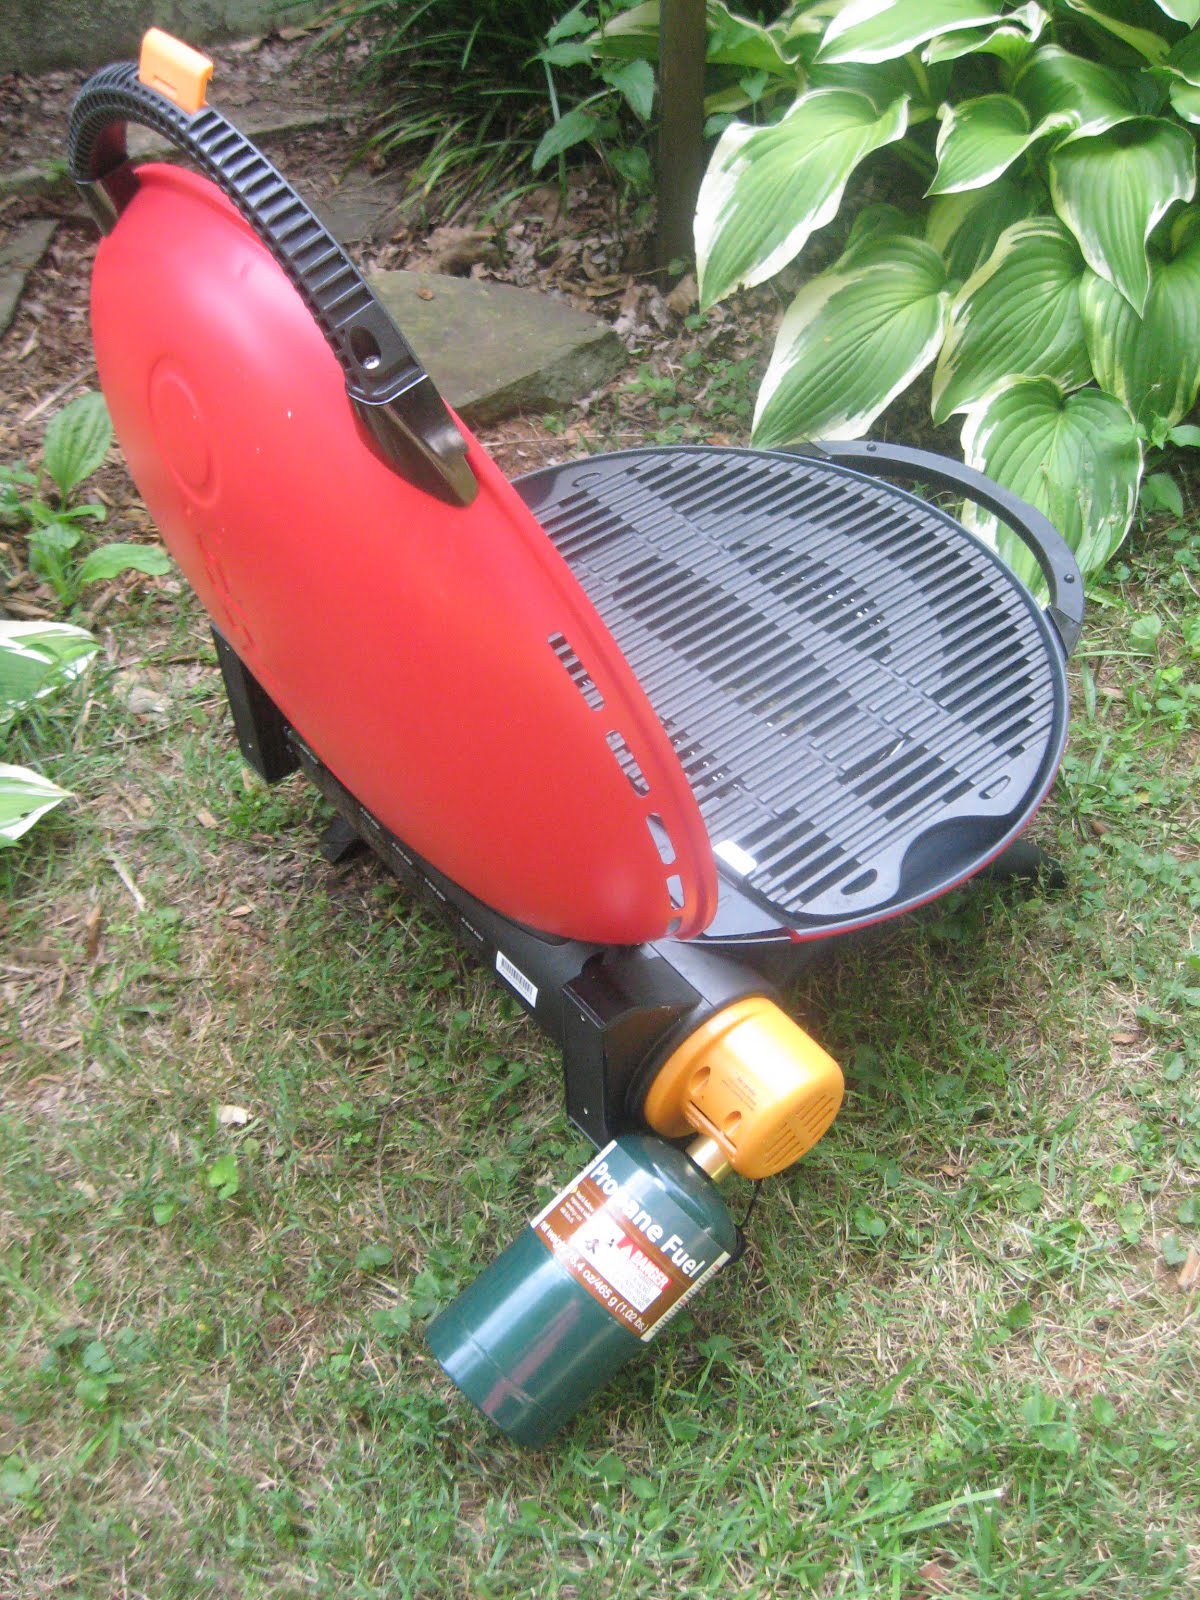 Barbecue Master: Grill - Gas Grill review